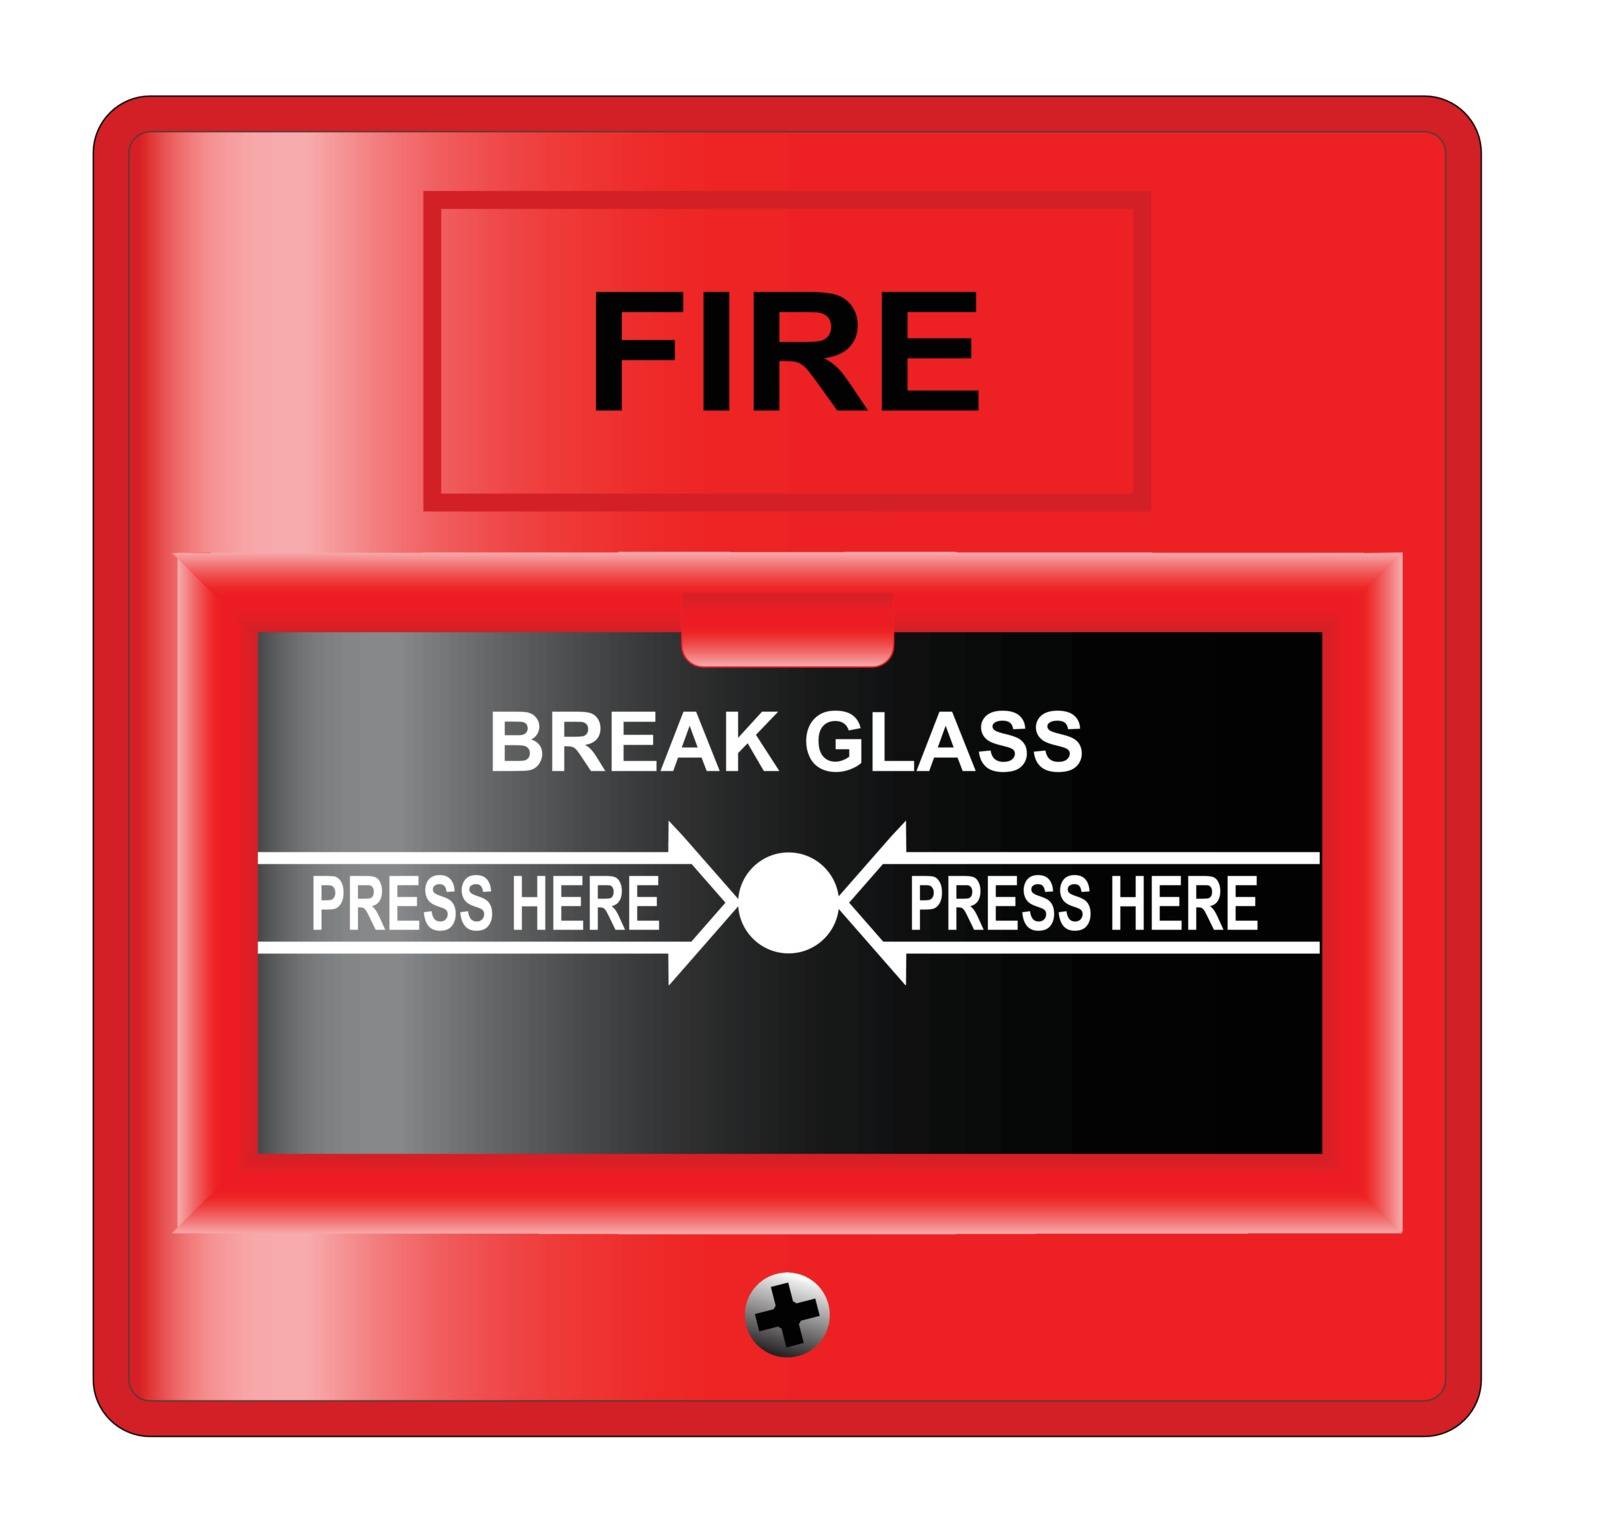 A 'break glass' fire alarm over a white background.